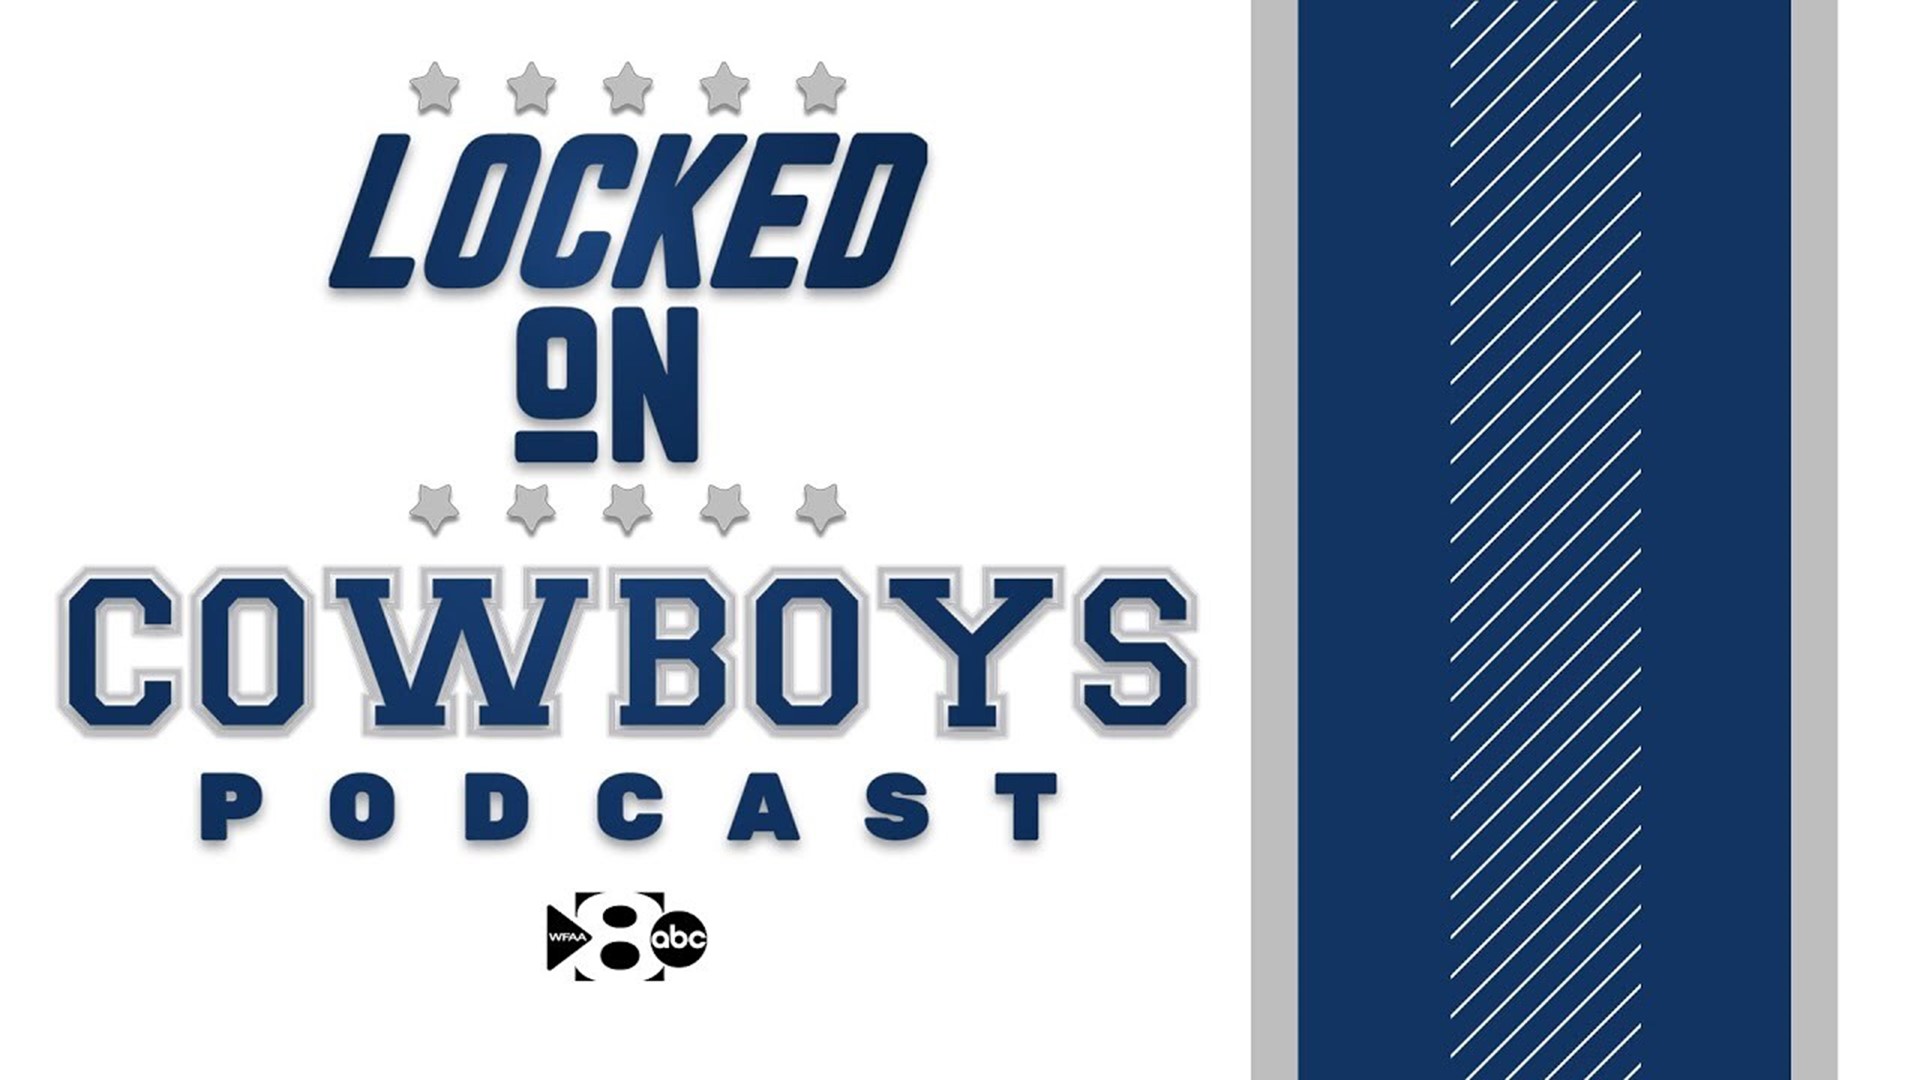 In this episode of Locked On Cowboys, Marcus Mosher and Landon McCool review all the latest news and notes surrounding the second OTA practice for Dallas.